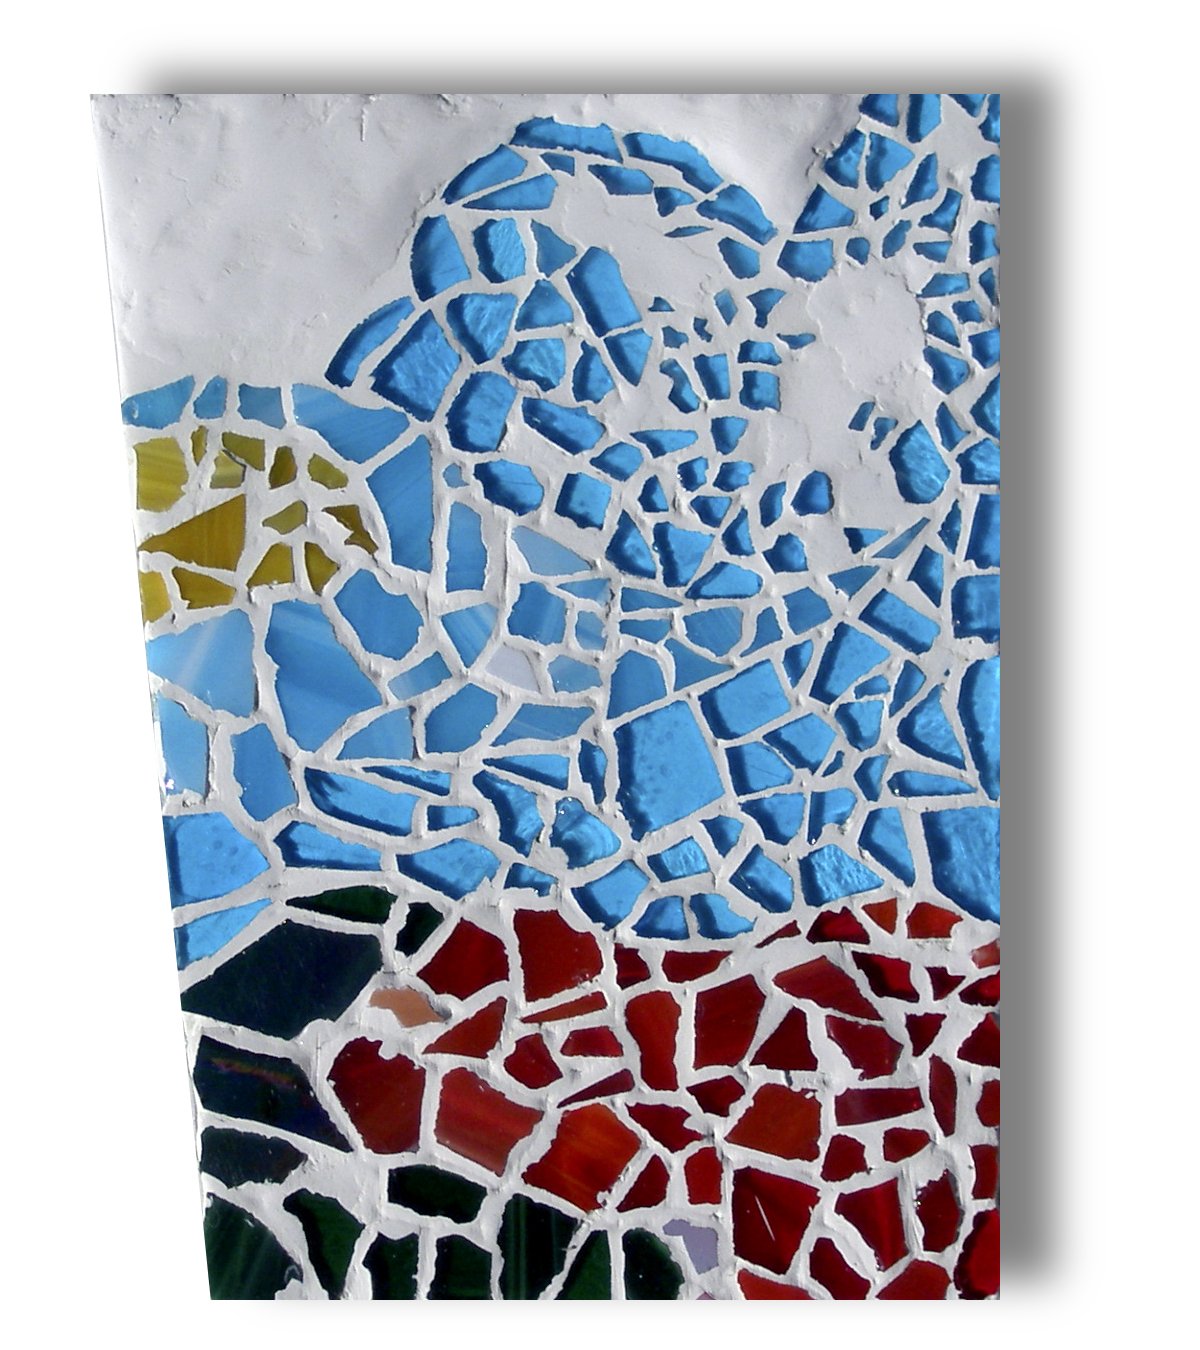   Beach Scene  glass mosaic on glass. 2010    owned by Private Collector   